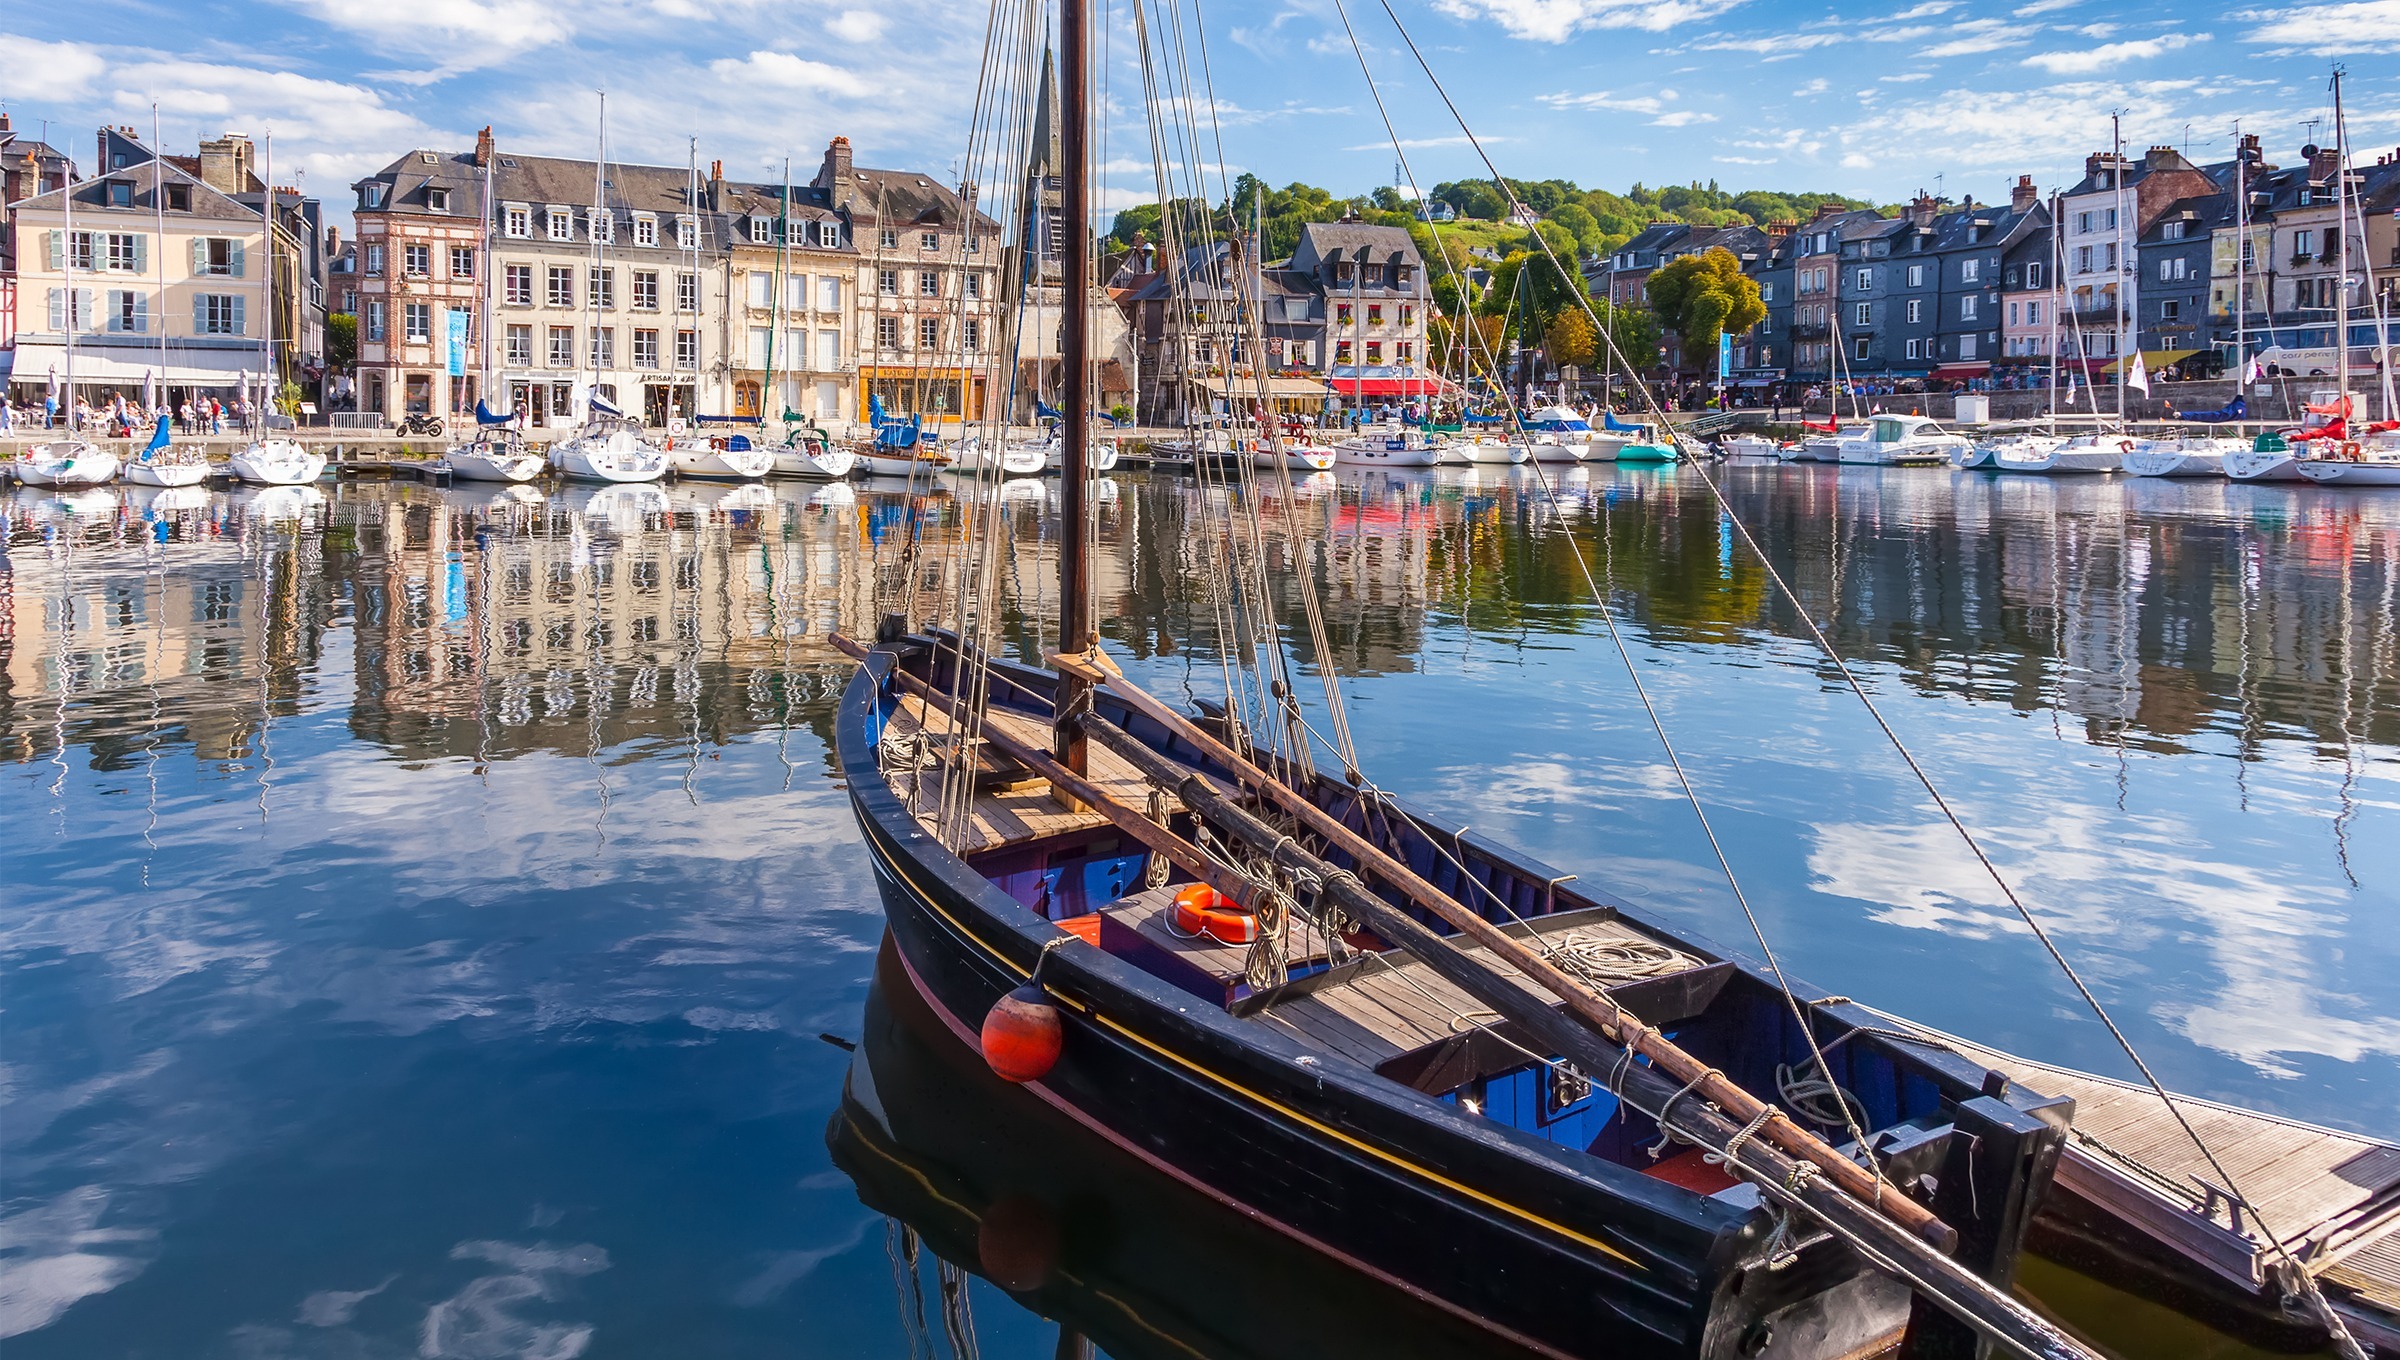 Honfleur city in Normandy, France